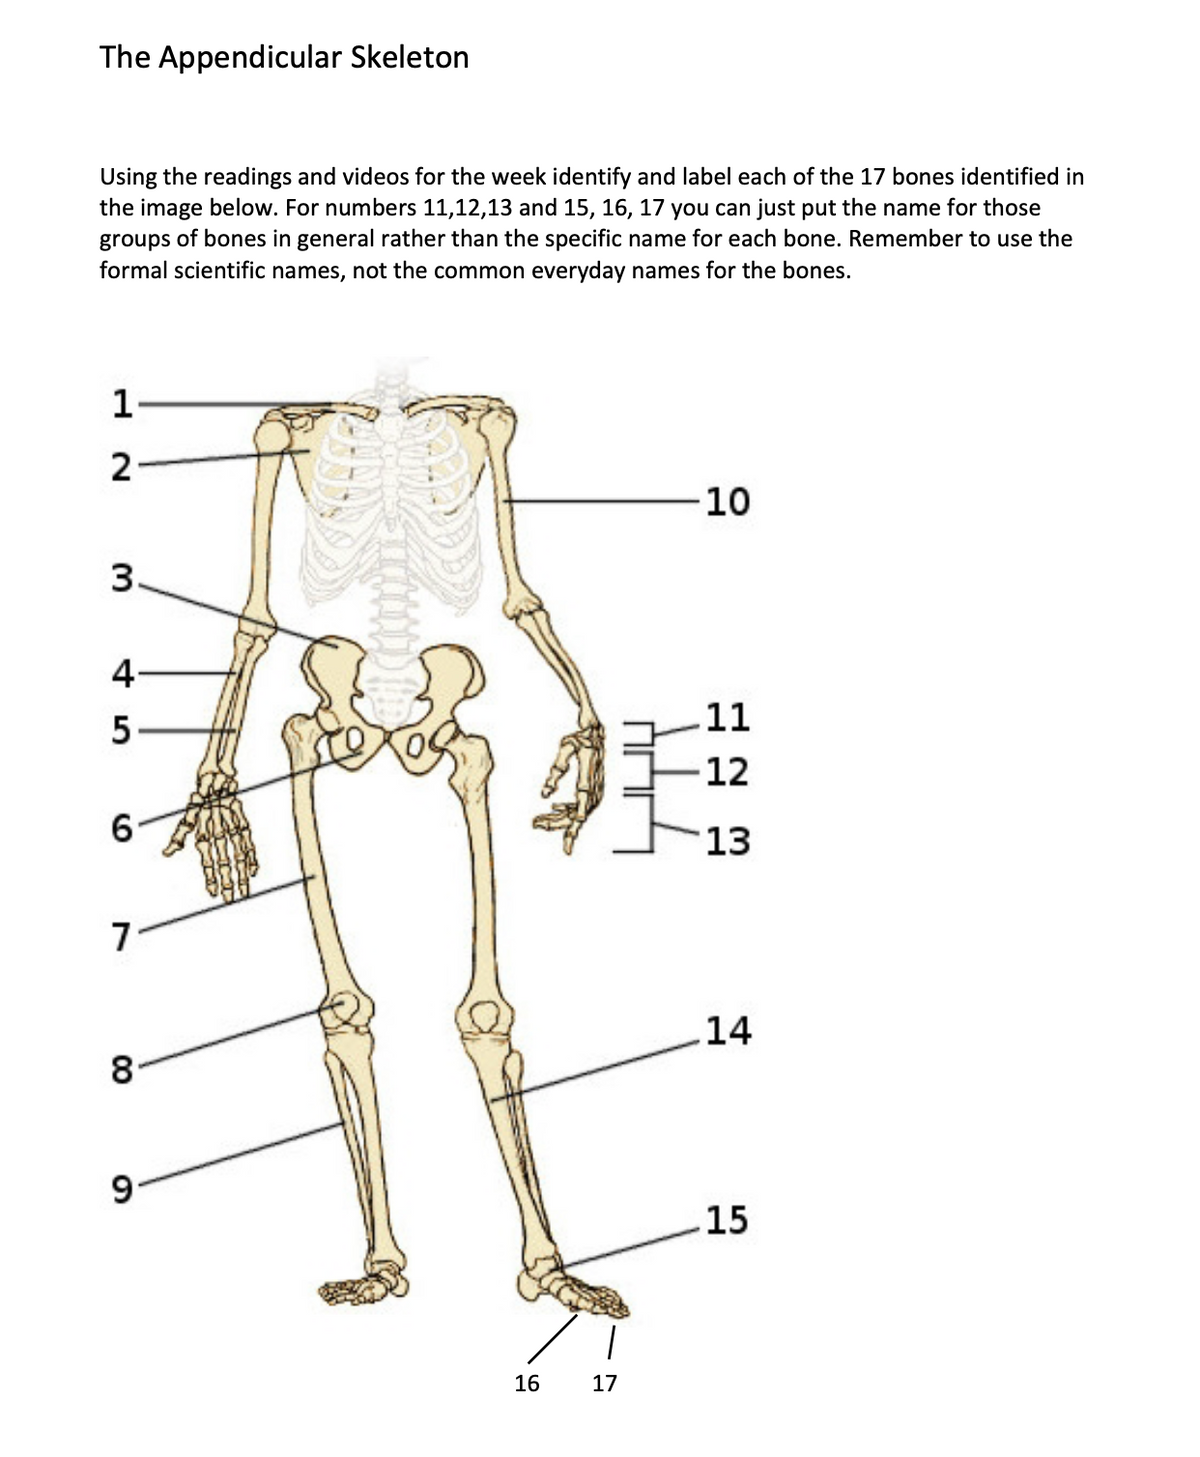 The Appendicular Skeleton
Using the readings and videos for the week identify and label each of the 17 bones identified in
the image below. For numbers 11,12,13 and 15, 16, 17 you can just put the name for those
groups of bones in general rather than the specific name for each bone. Remember to use the
formal scientific names, not the common everyday names for the bones.
f
1-
2
N
3
45
4-
6
7
8
9-
16 17
-10
11
12
13
14
15